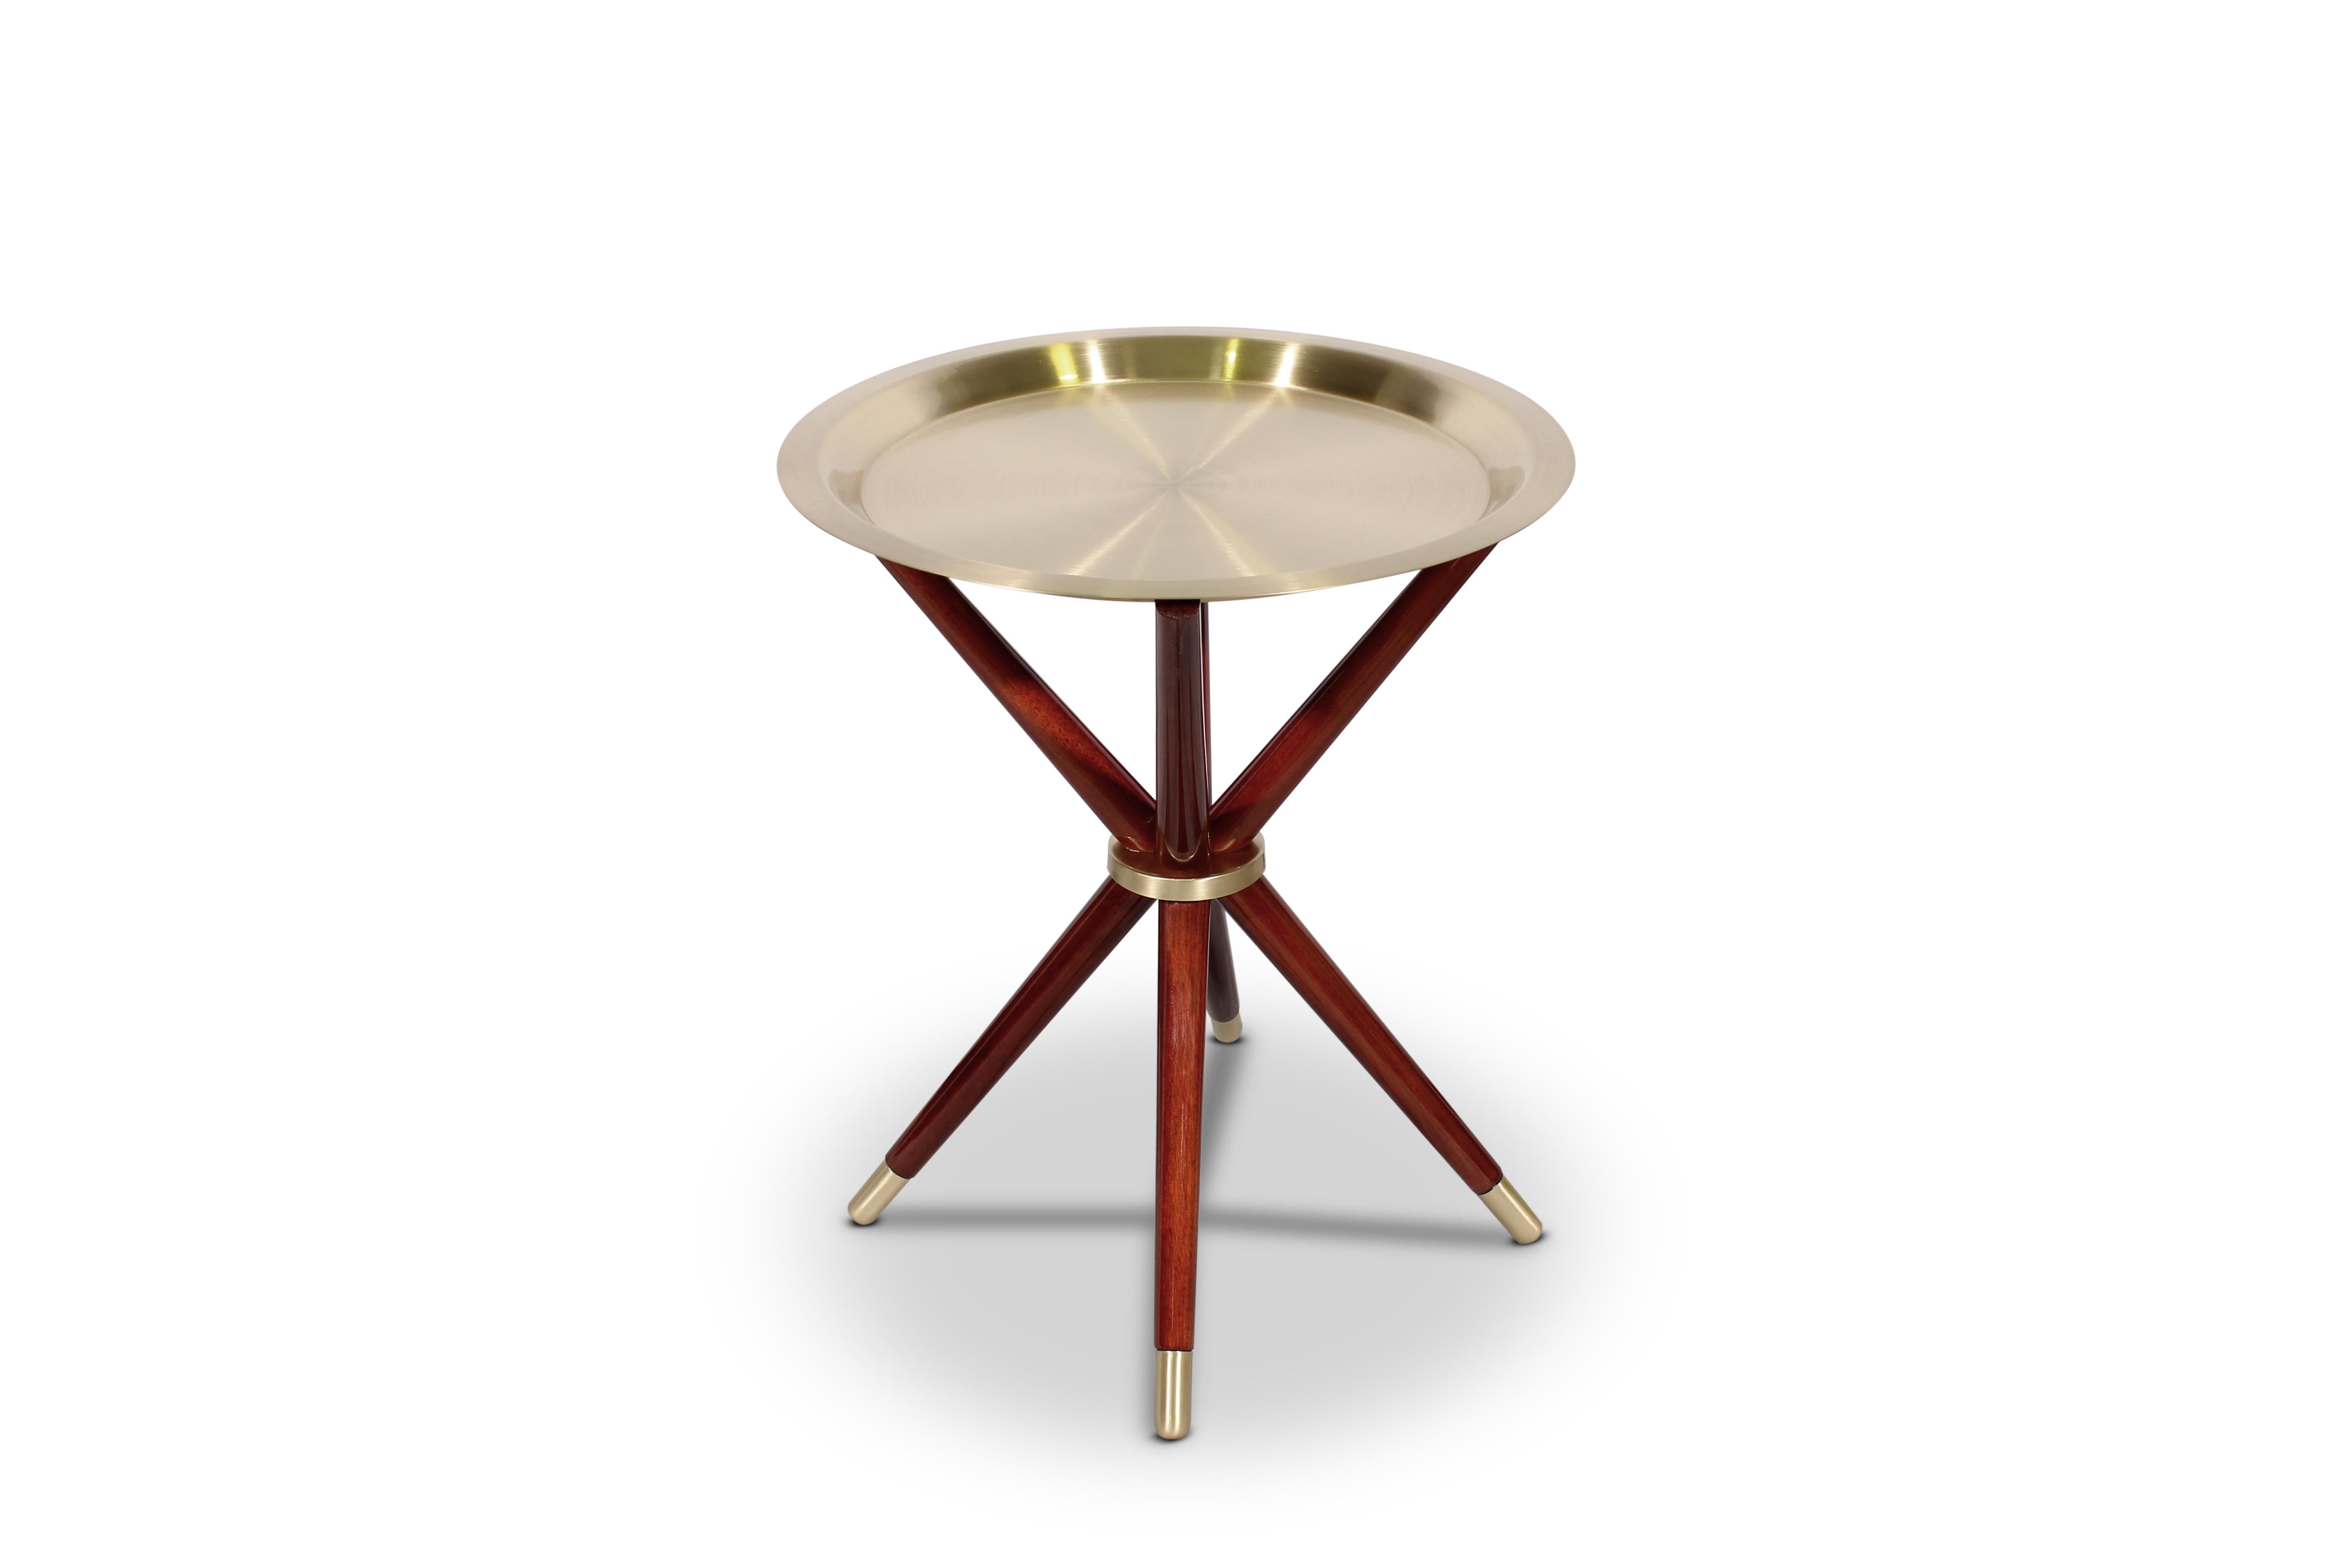 Inspired by the enormous tower, Porustudio created a modern side table called Seattle. The Seattle contemporary side table features a top with a shape of a tray in brushed brass. Supporting this elegant top, the Seattle modern side table features